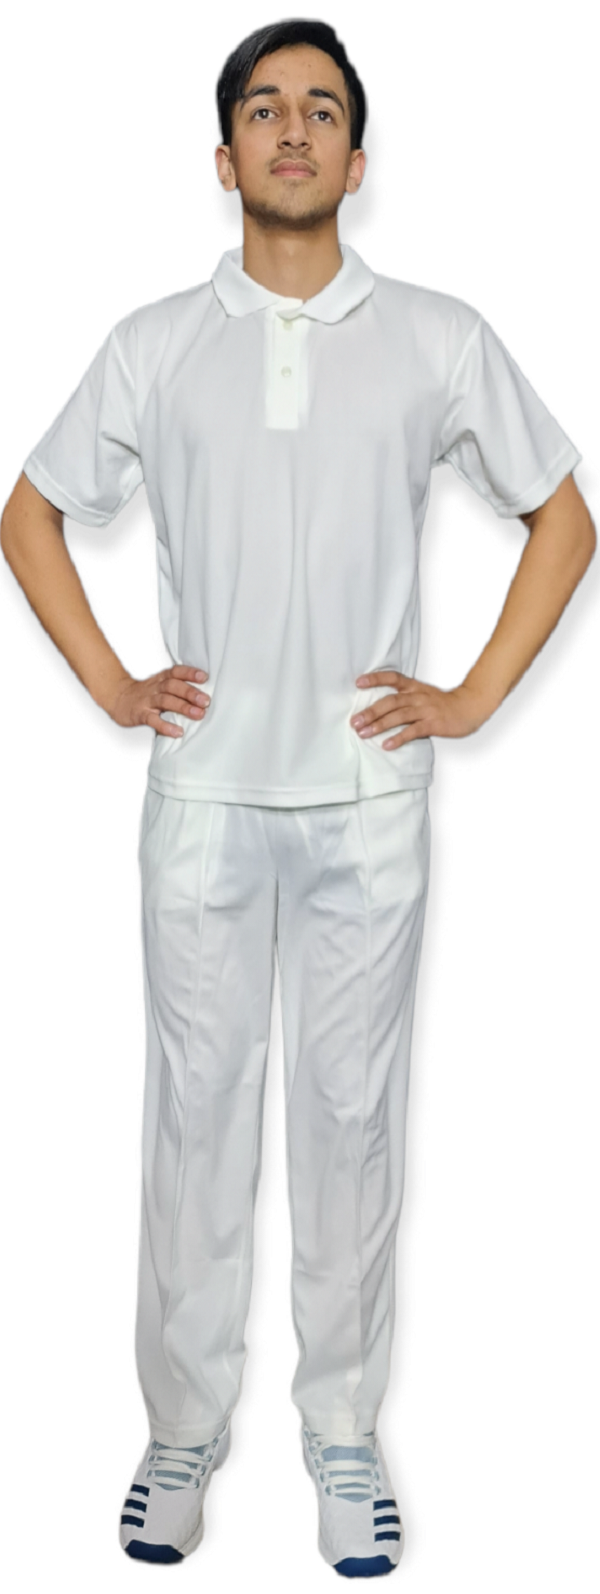 Cricket Outfit White